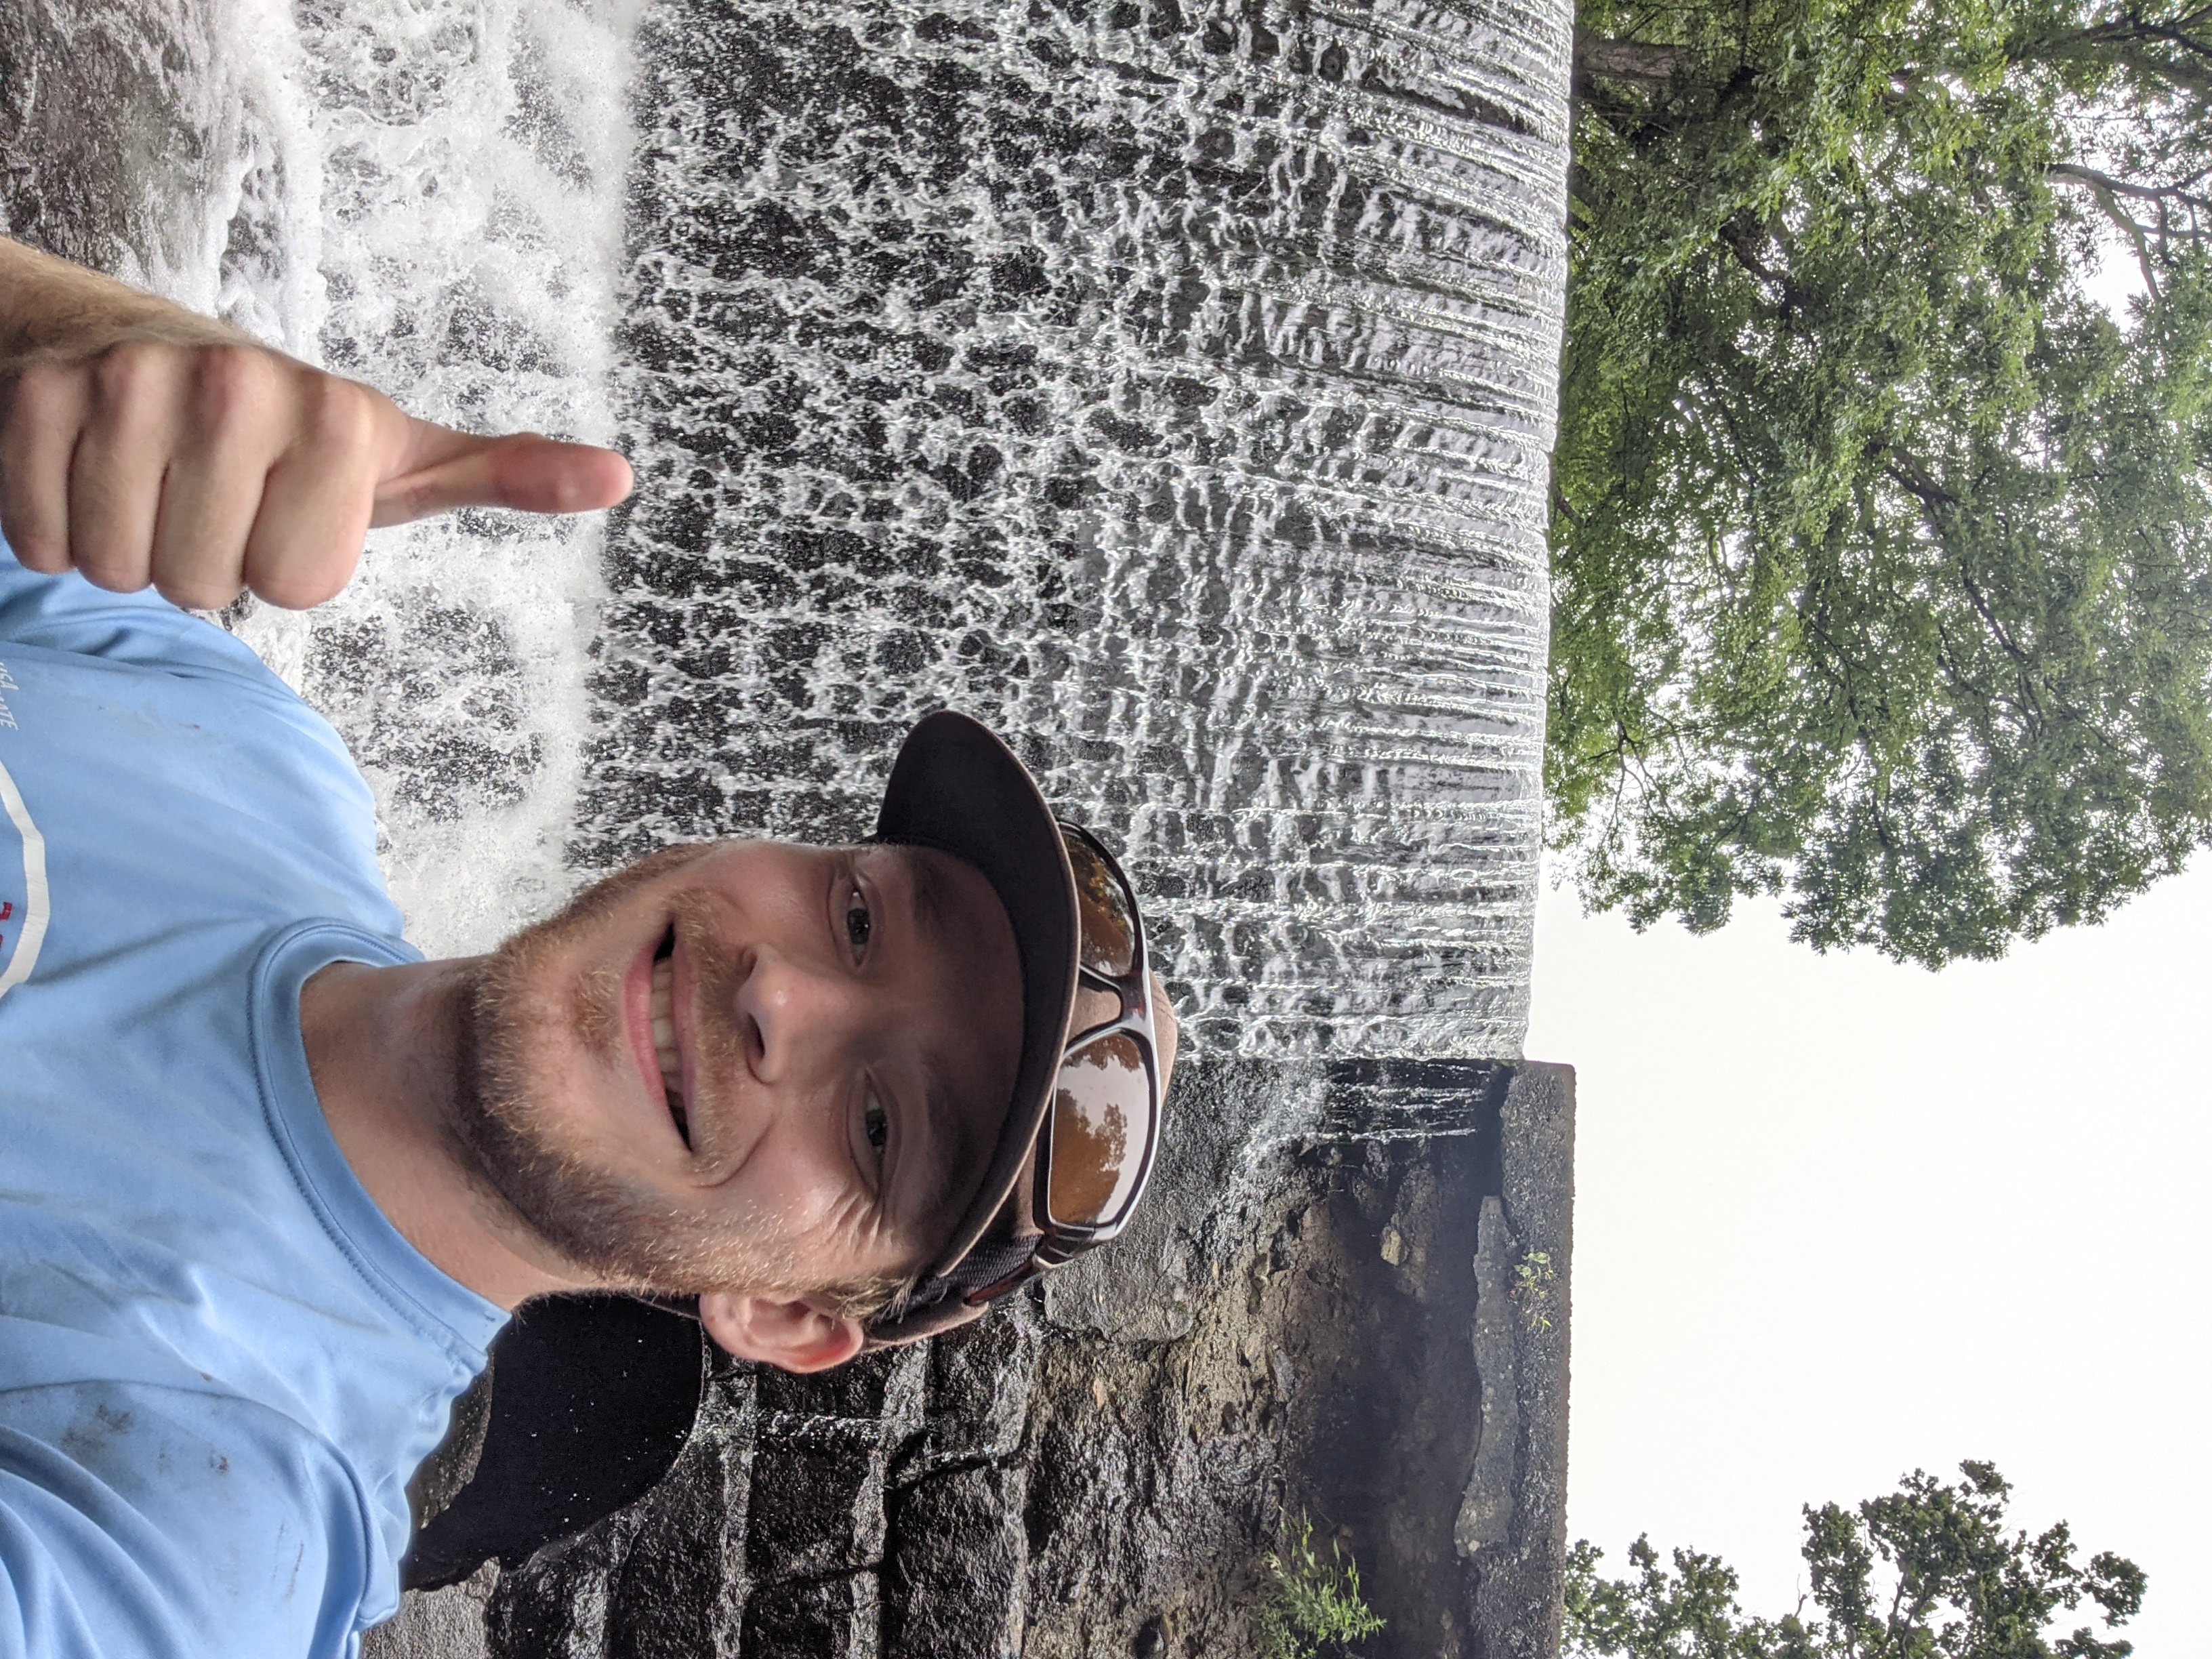 Student stands, giving a thumbs up, in front of a waterfall.